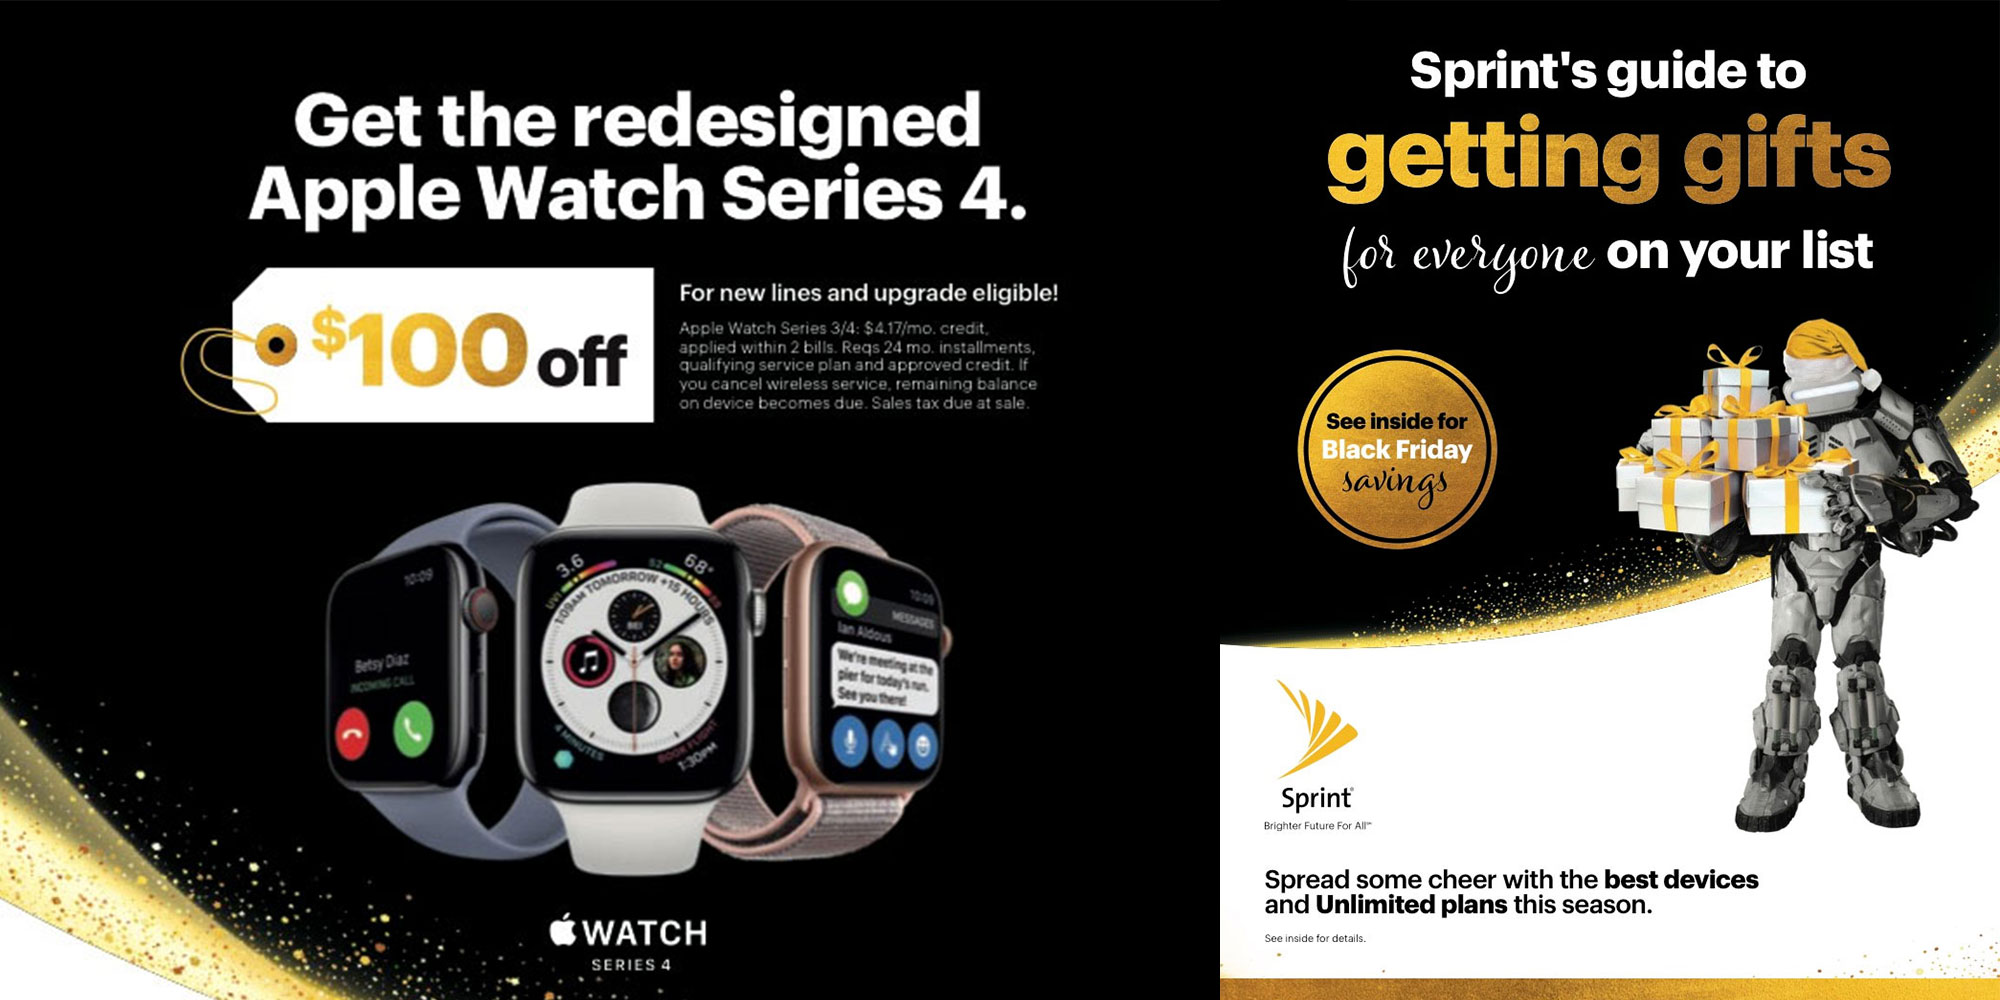 Sprint's Black Friday ad delivers rare Apple Watch Series 4 discount - What Are Sprint Black Friday Deals